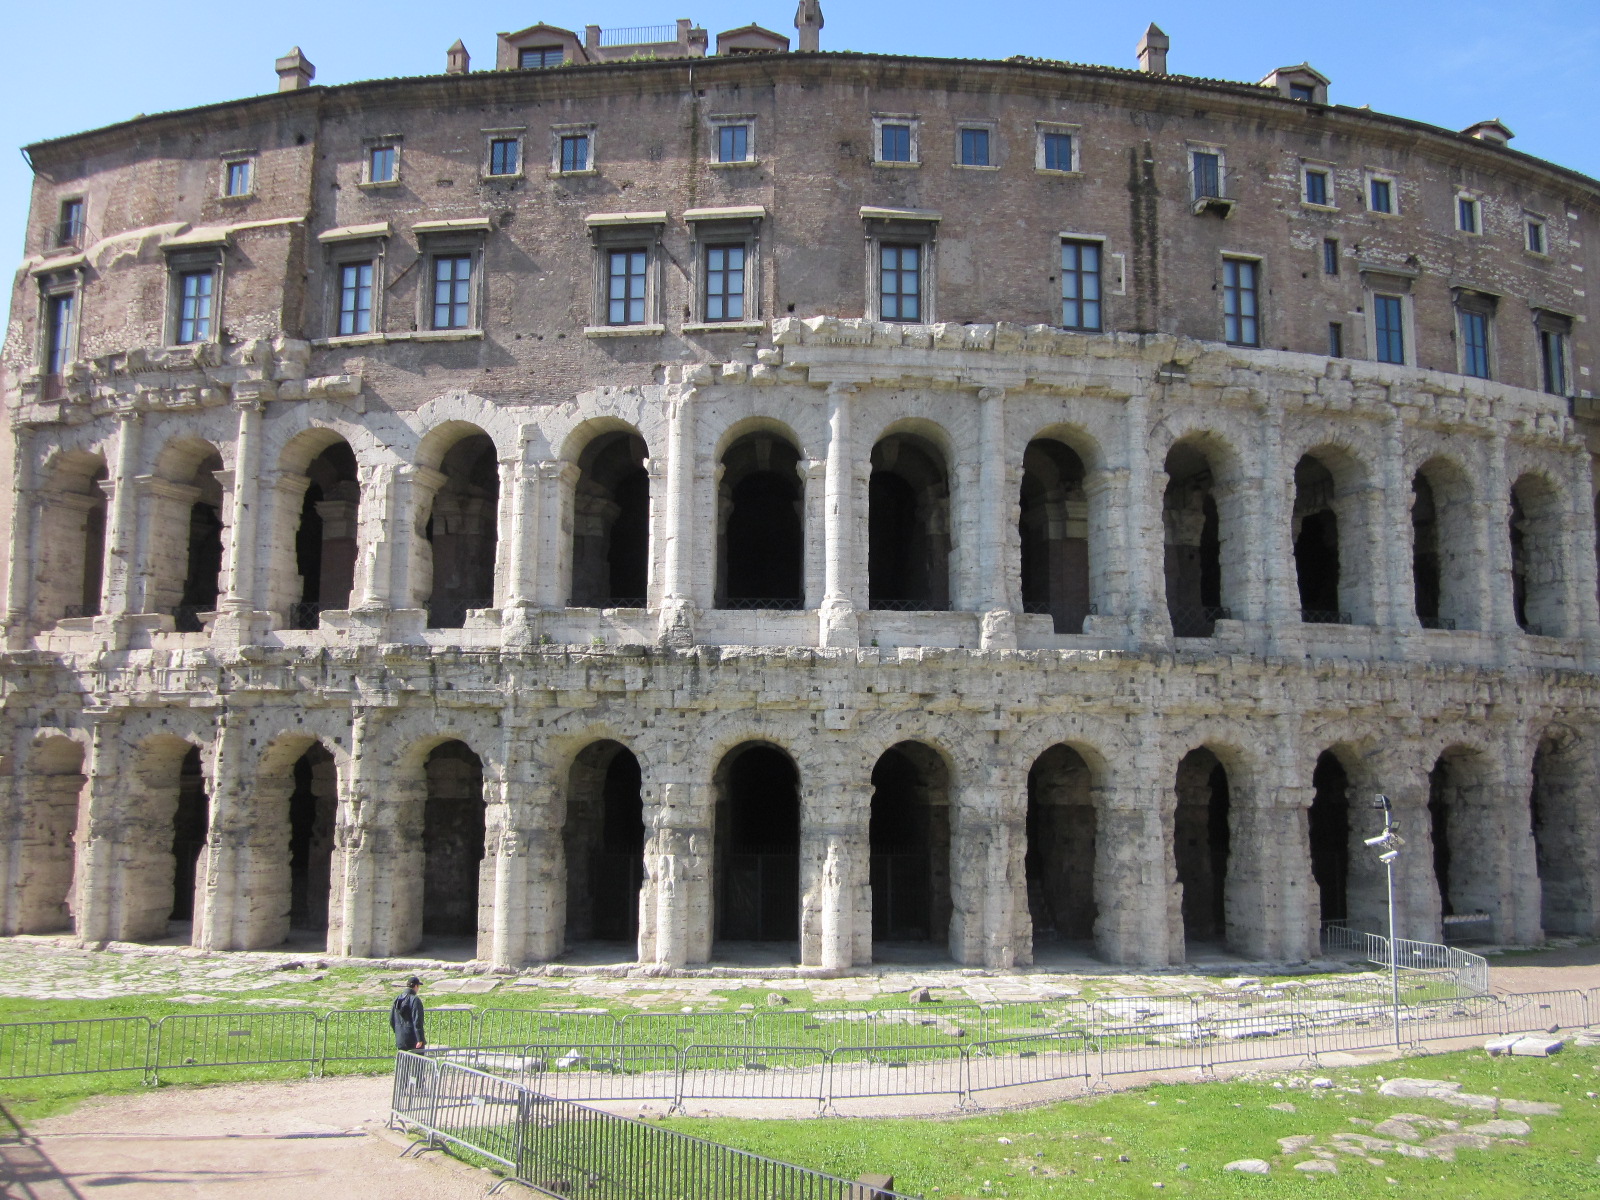 Sights of Rome: The Theater of Marcellus